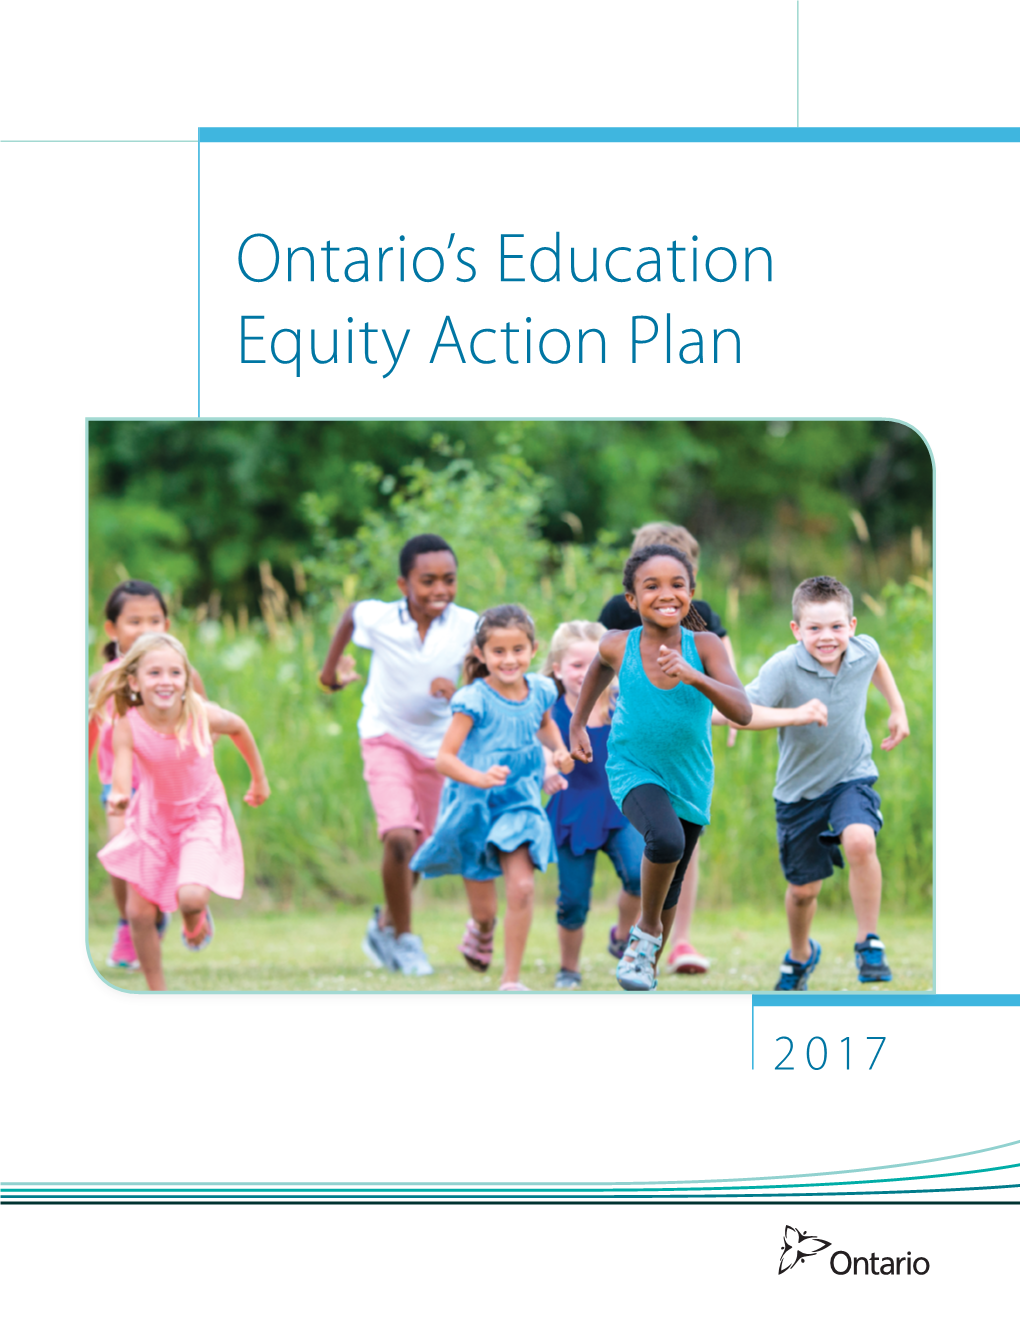 Ontario's Education Equity Action Plan